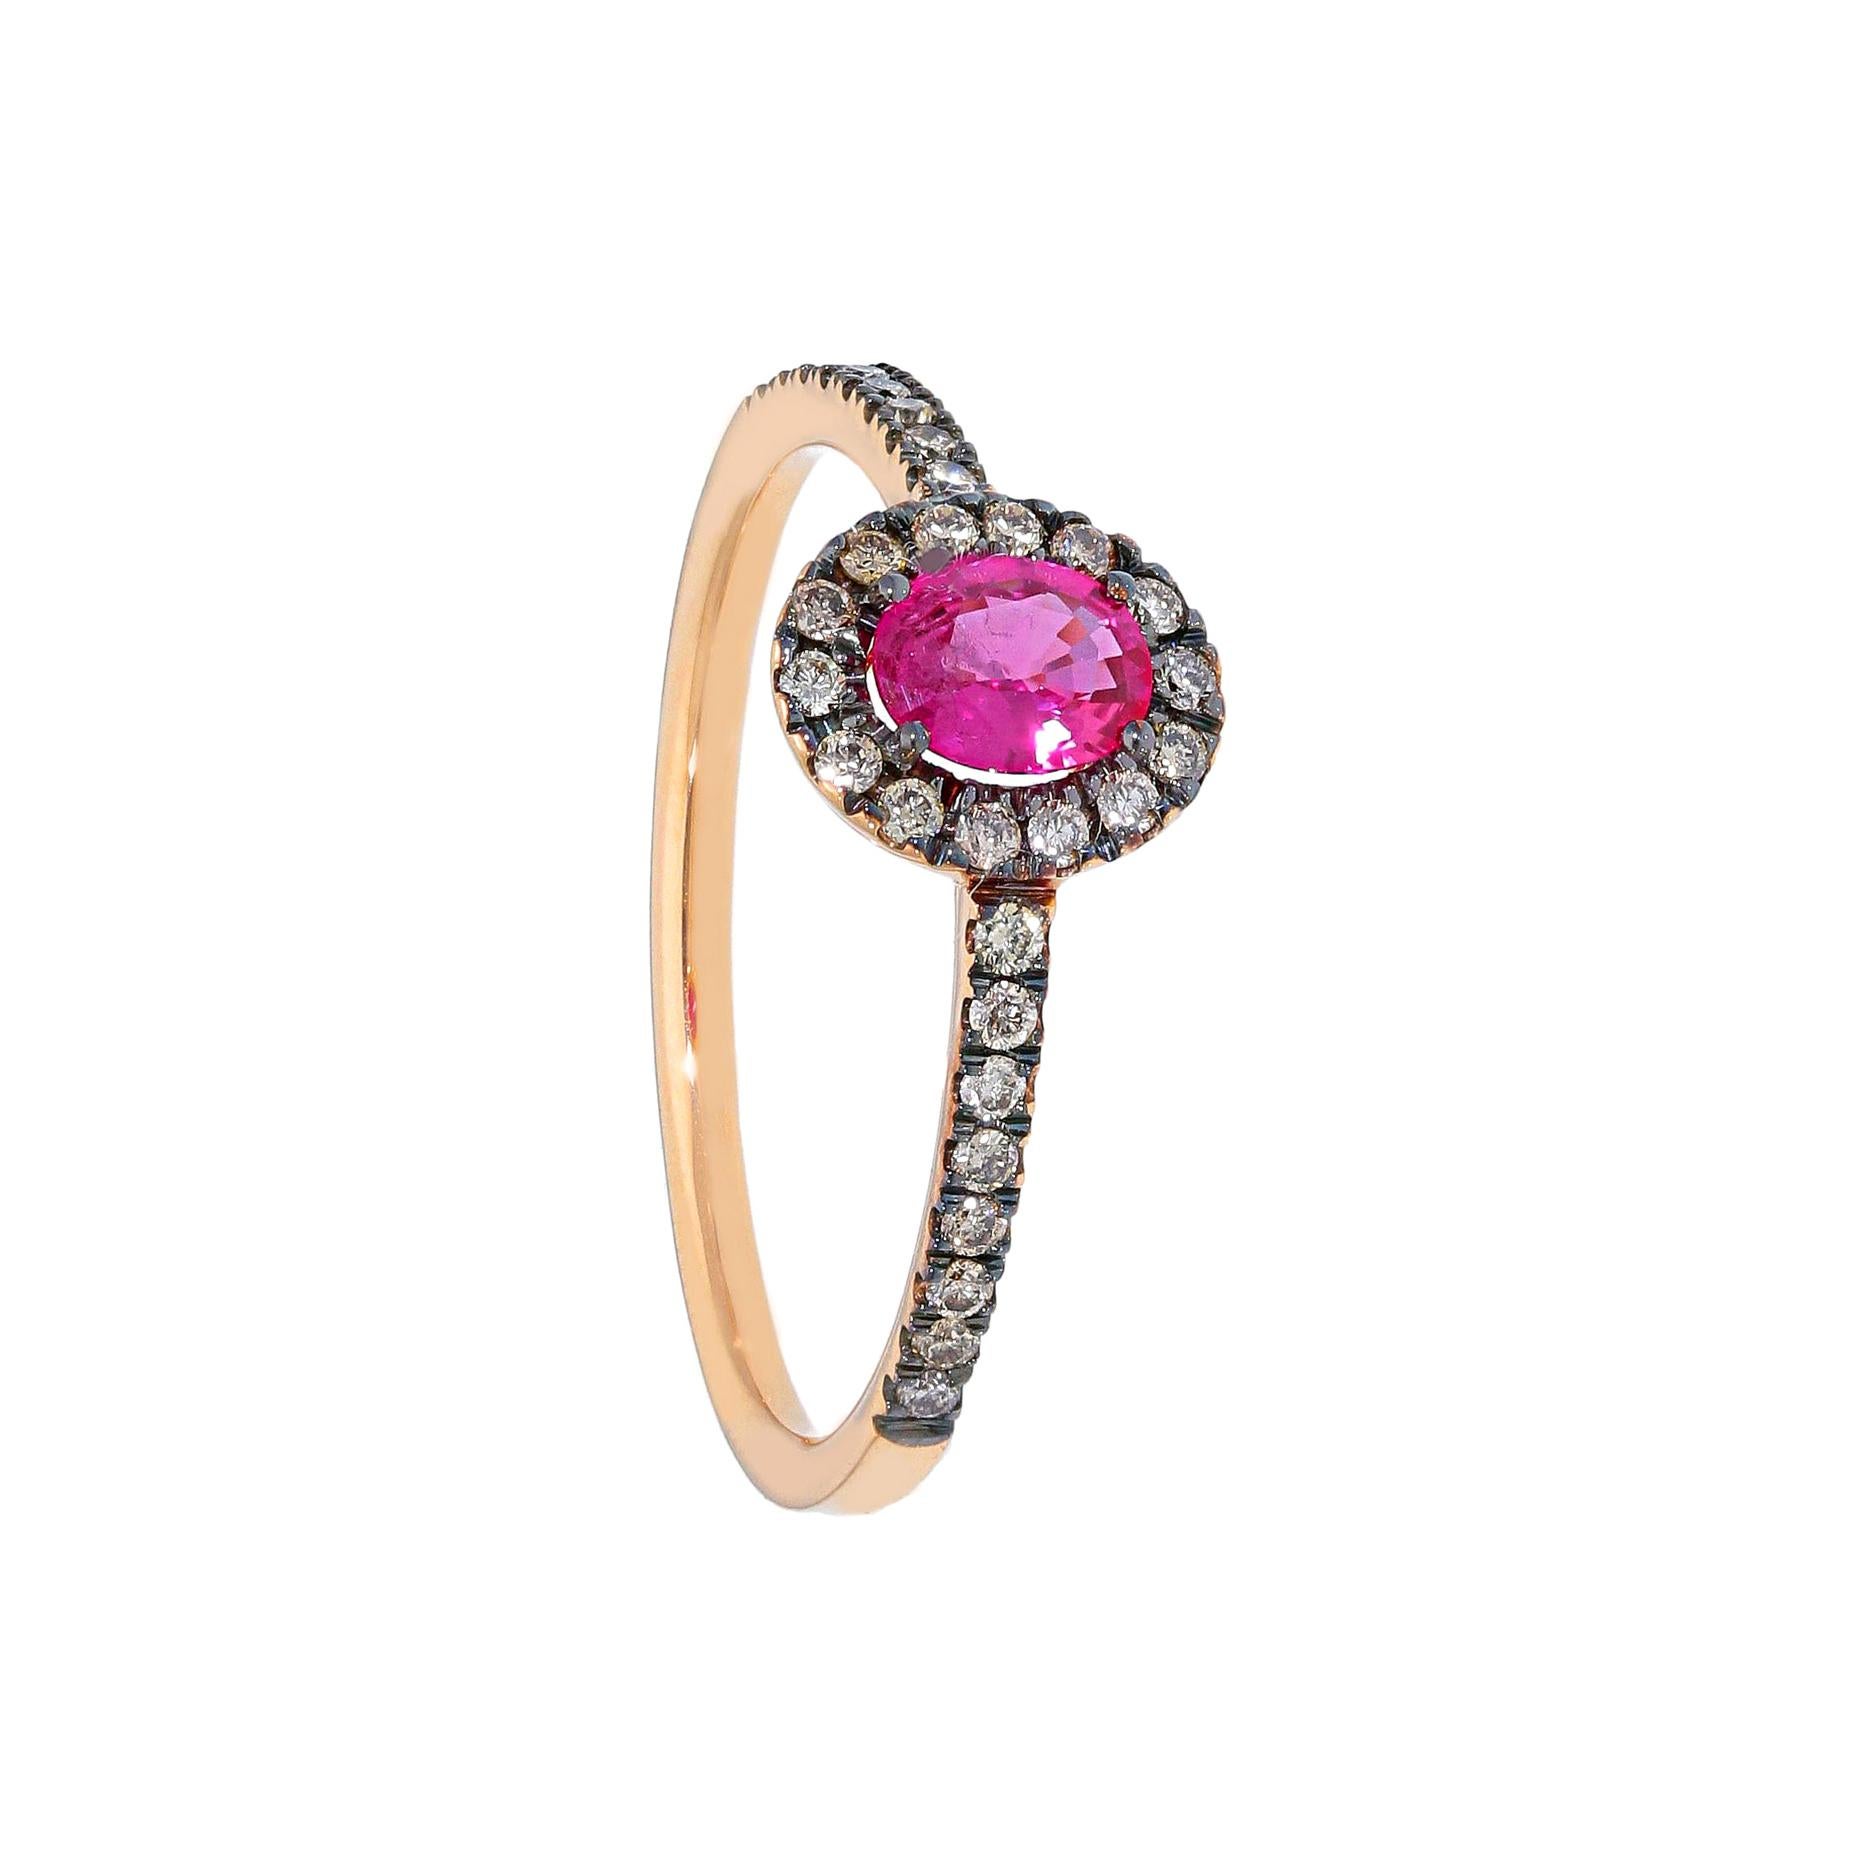 For Sale:  18k Black and Rose Golg Wedding Ring with Ruby and Brown Diamonds